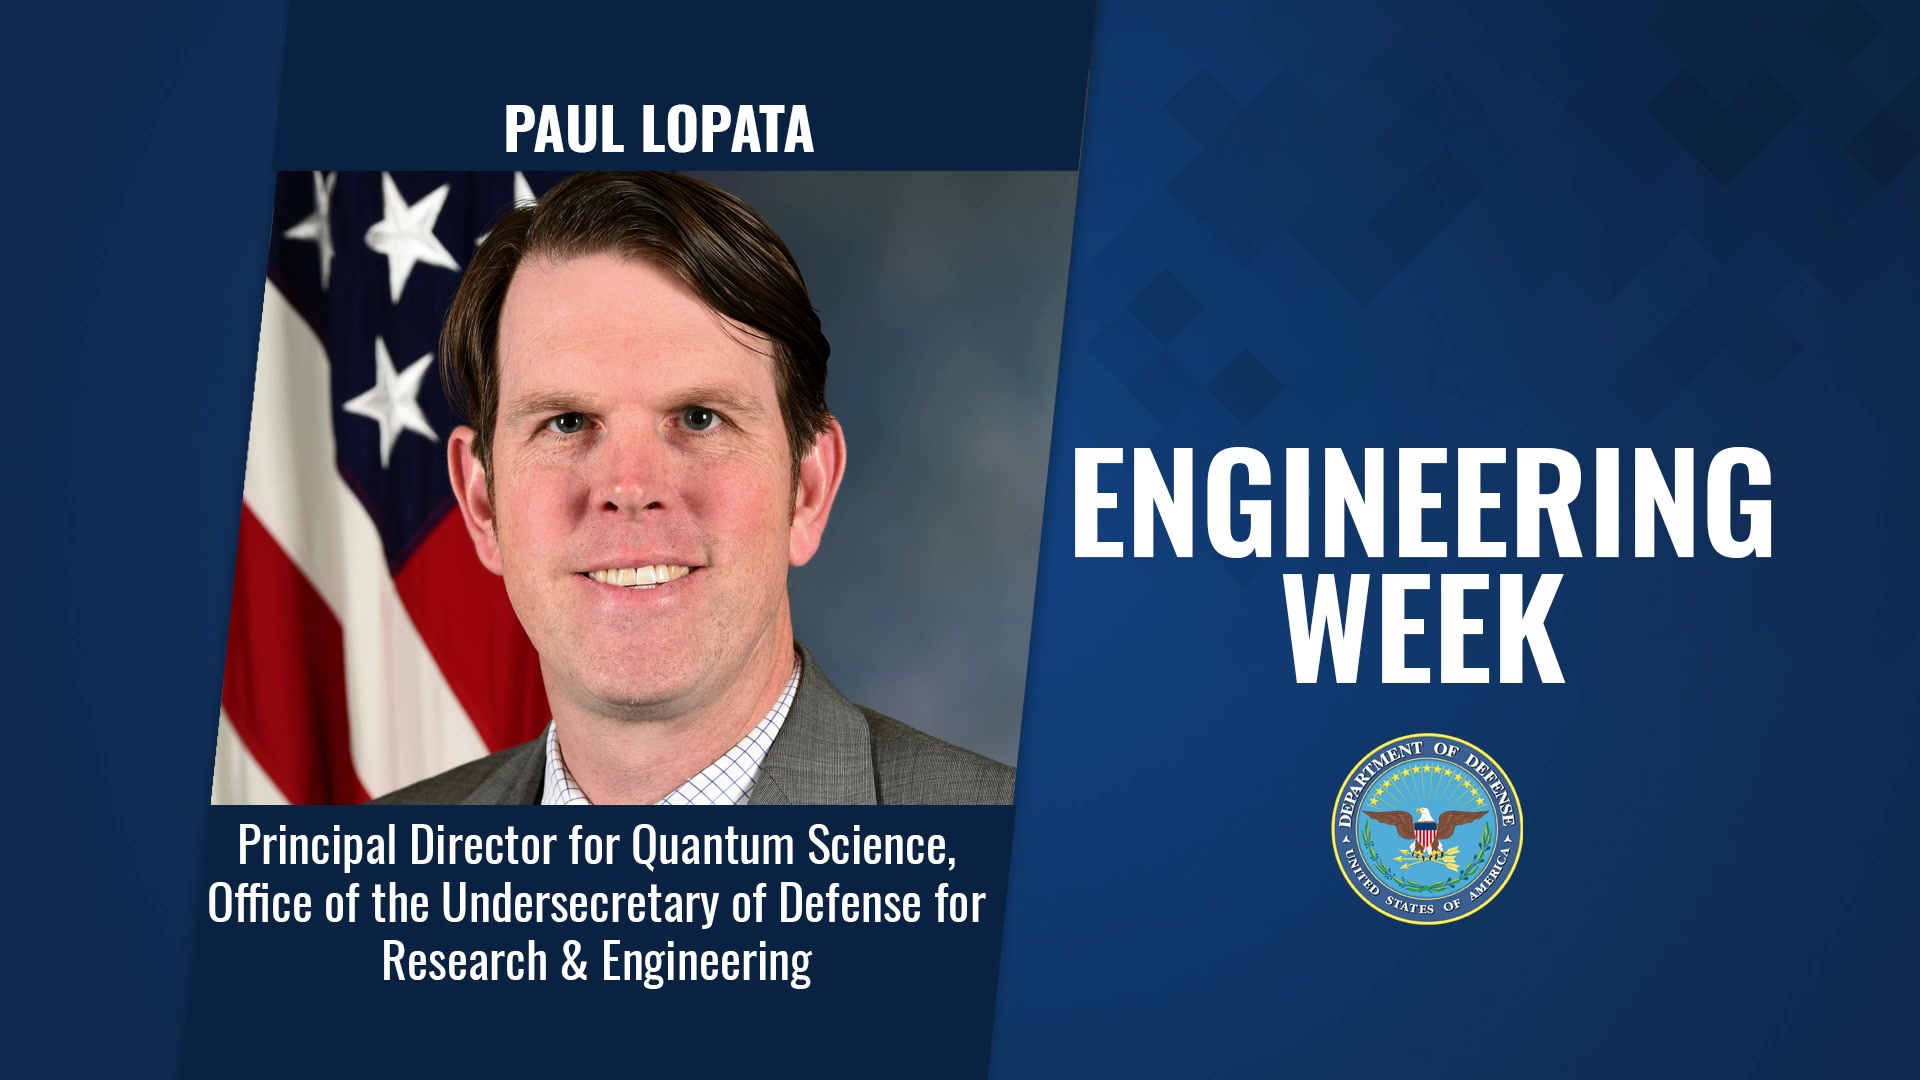 During Engineer Week, which runs Feb. 21-27, 2021, Paul Lopata, principal director for quantum science, office of undersecretary of defense for research and engineering, explains why quantum science is so important to national security.